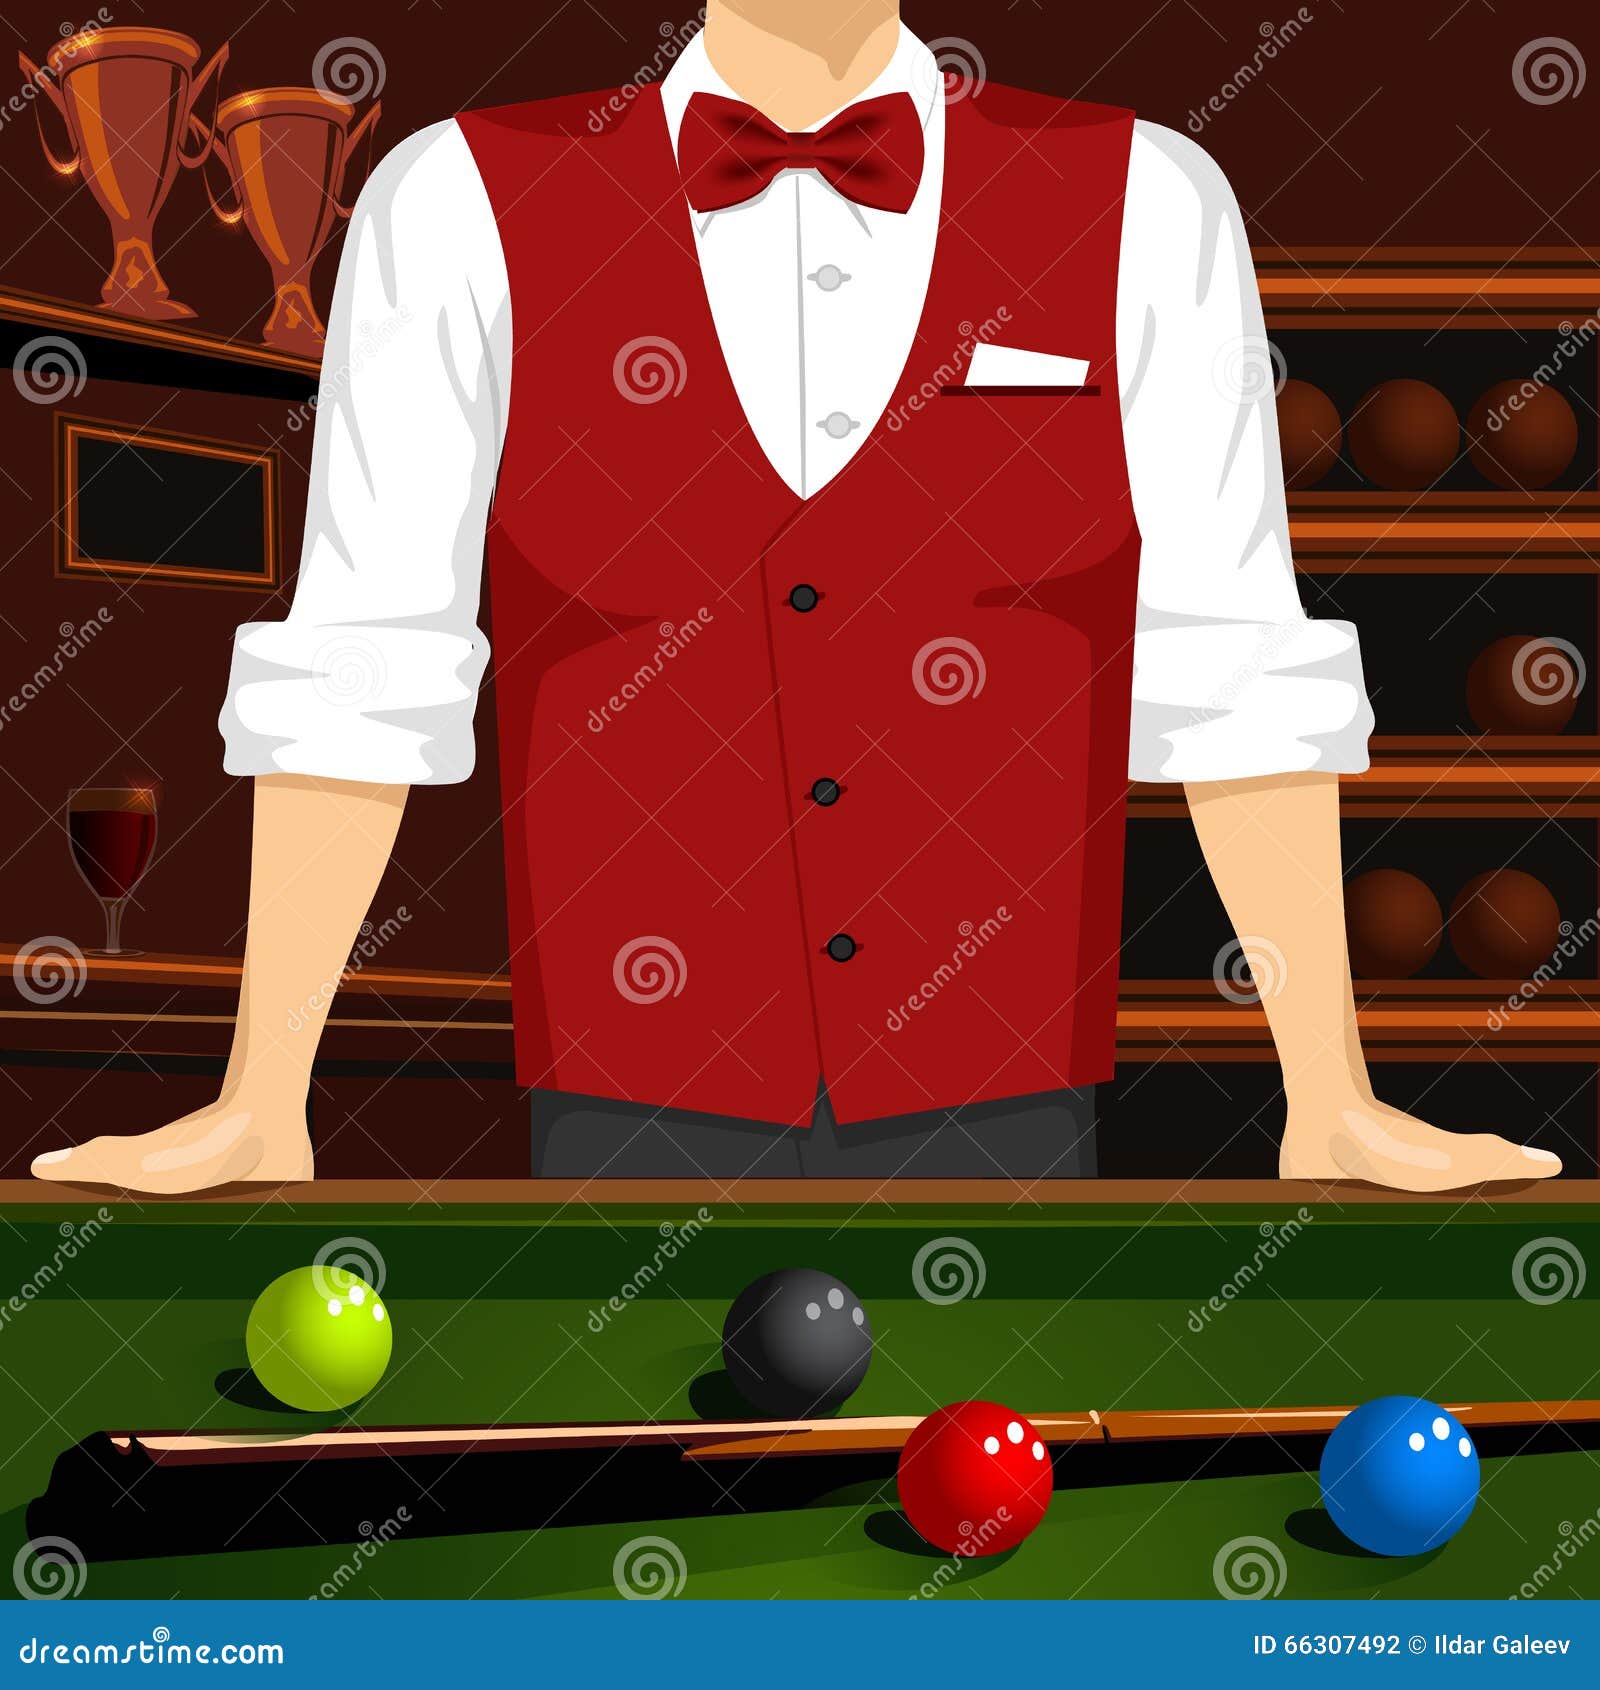 uitvinden Absoluut publiek Man Leaning on a Pool Table with Cue Stick and Colorful Billiard Balls  Stock Vector - Illustration of club, blue: 66307492